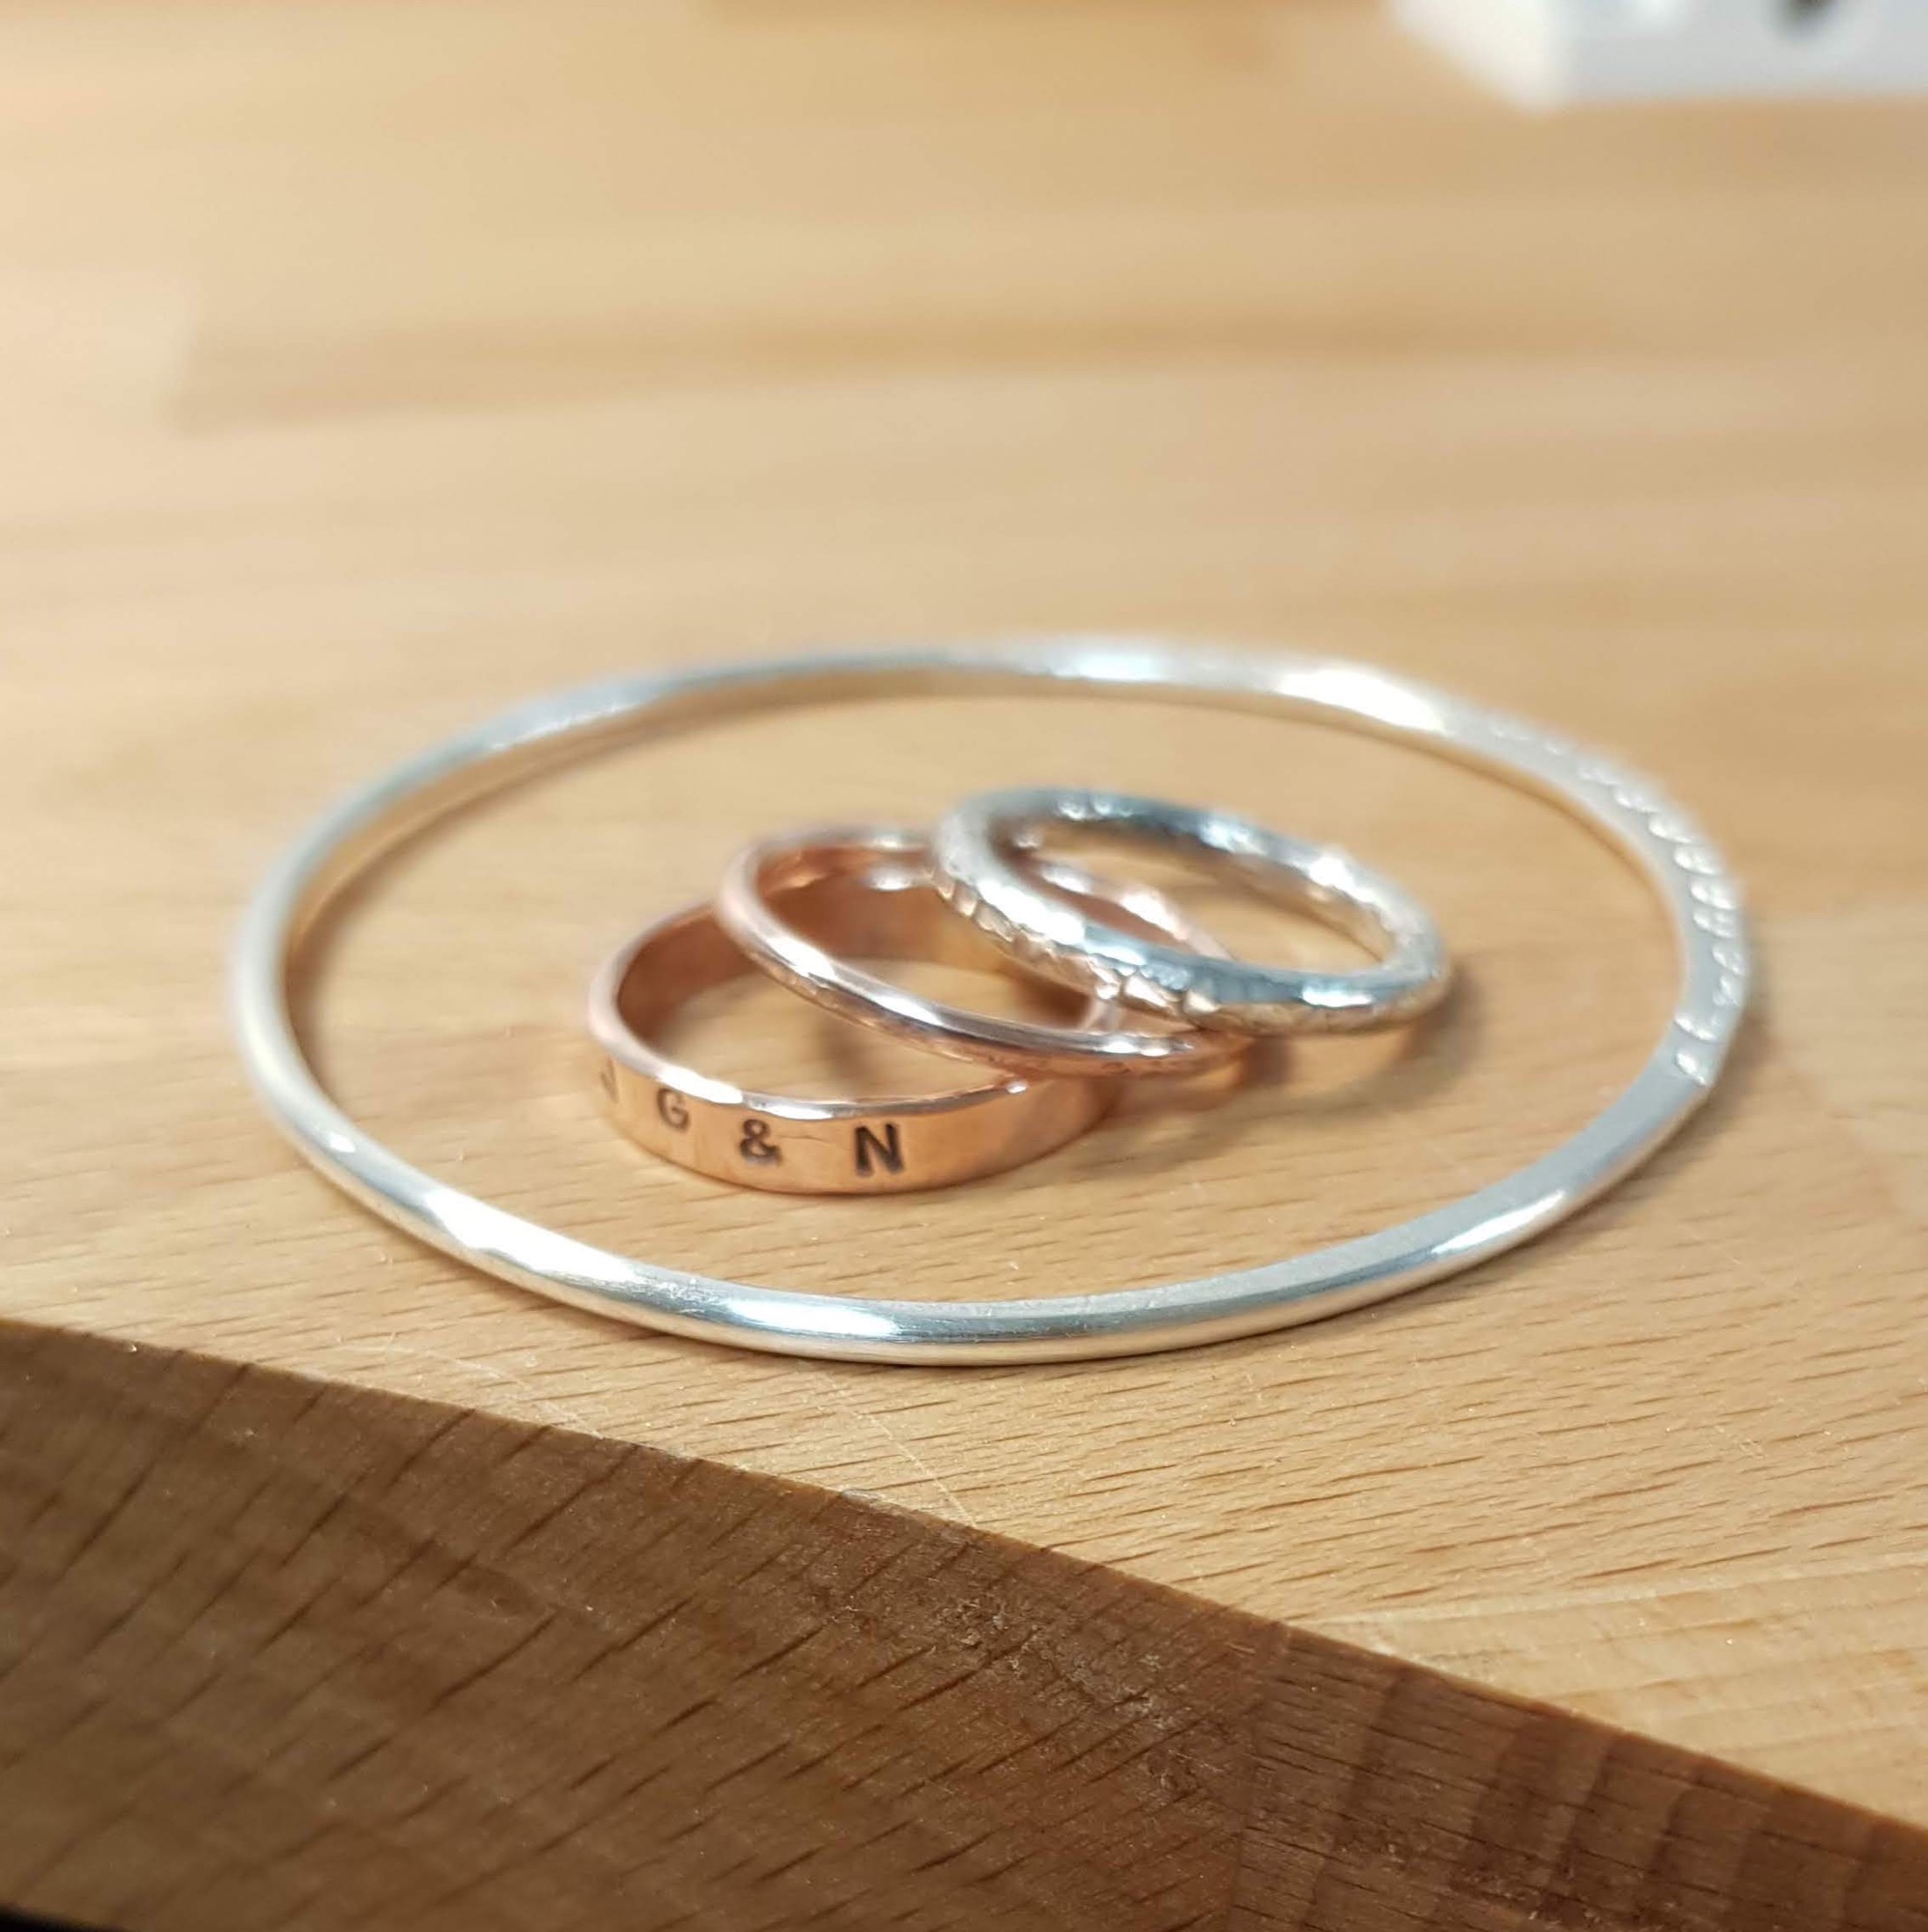 Learn how to make a ring in Warrington